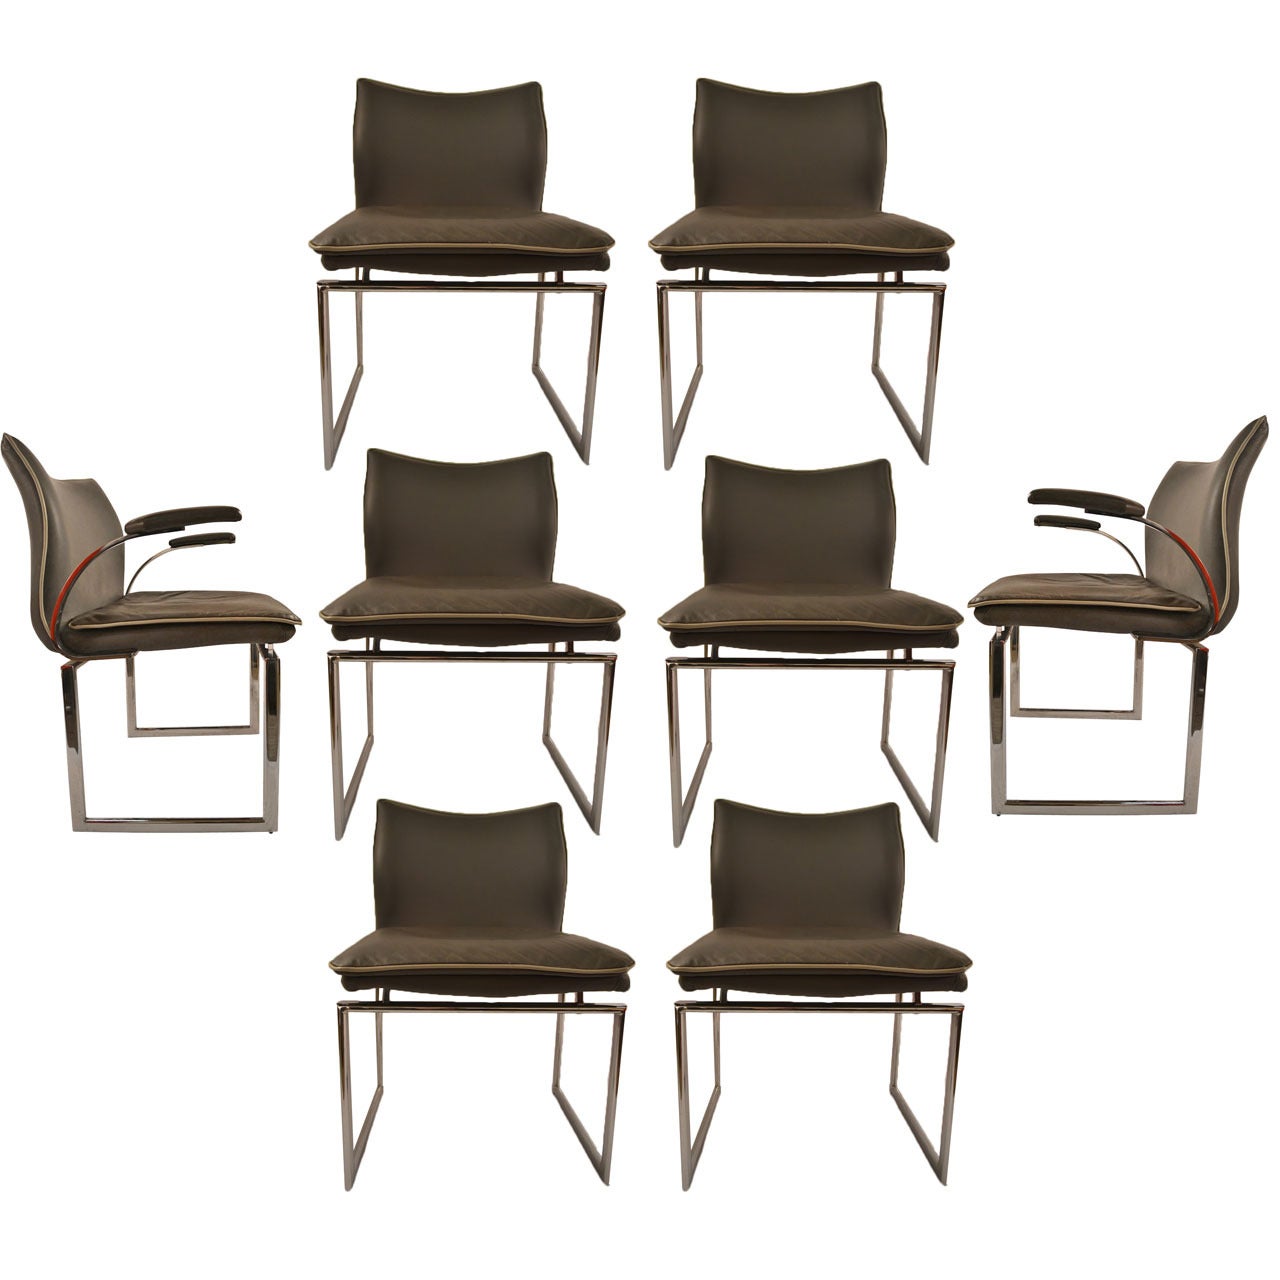 Set of Six Dining Chairs by Pieff of England   Four Side and Two Captains